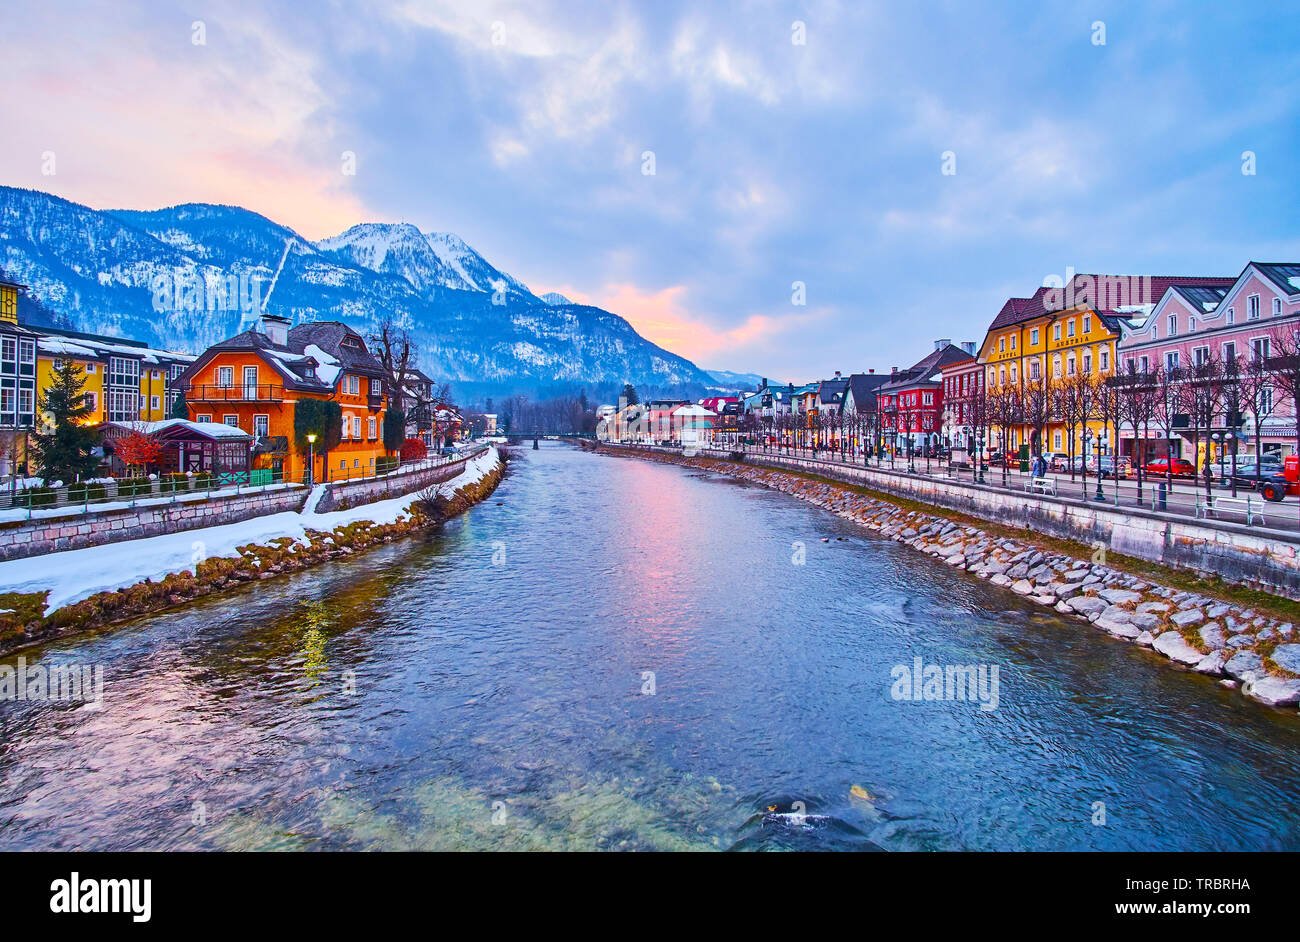 BAD ISCHL, AUSTRIA - FEBRUARY 20, 2019: The cloudy sunset sky above the Alps with traditional Salzkammergut housing on the banks of Traun river on the Stock Photo